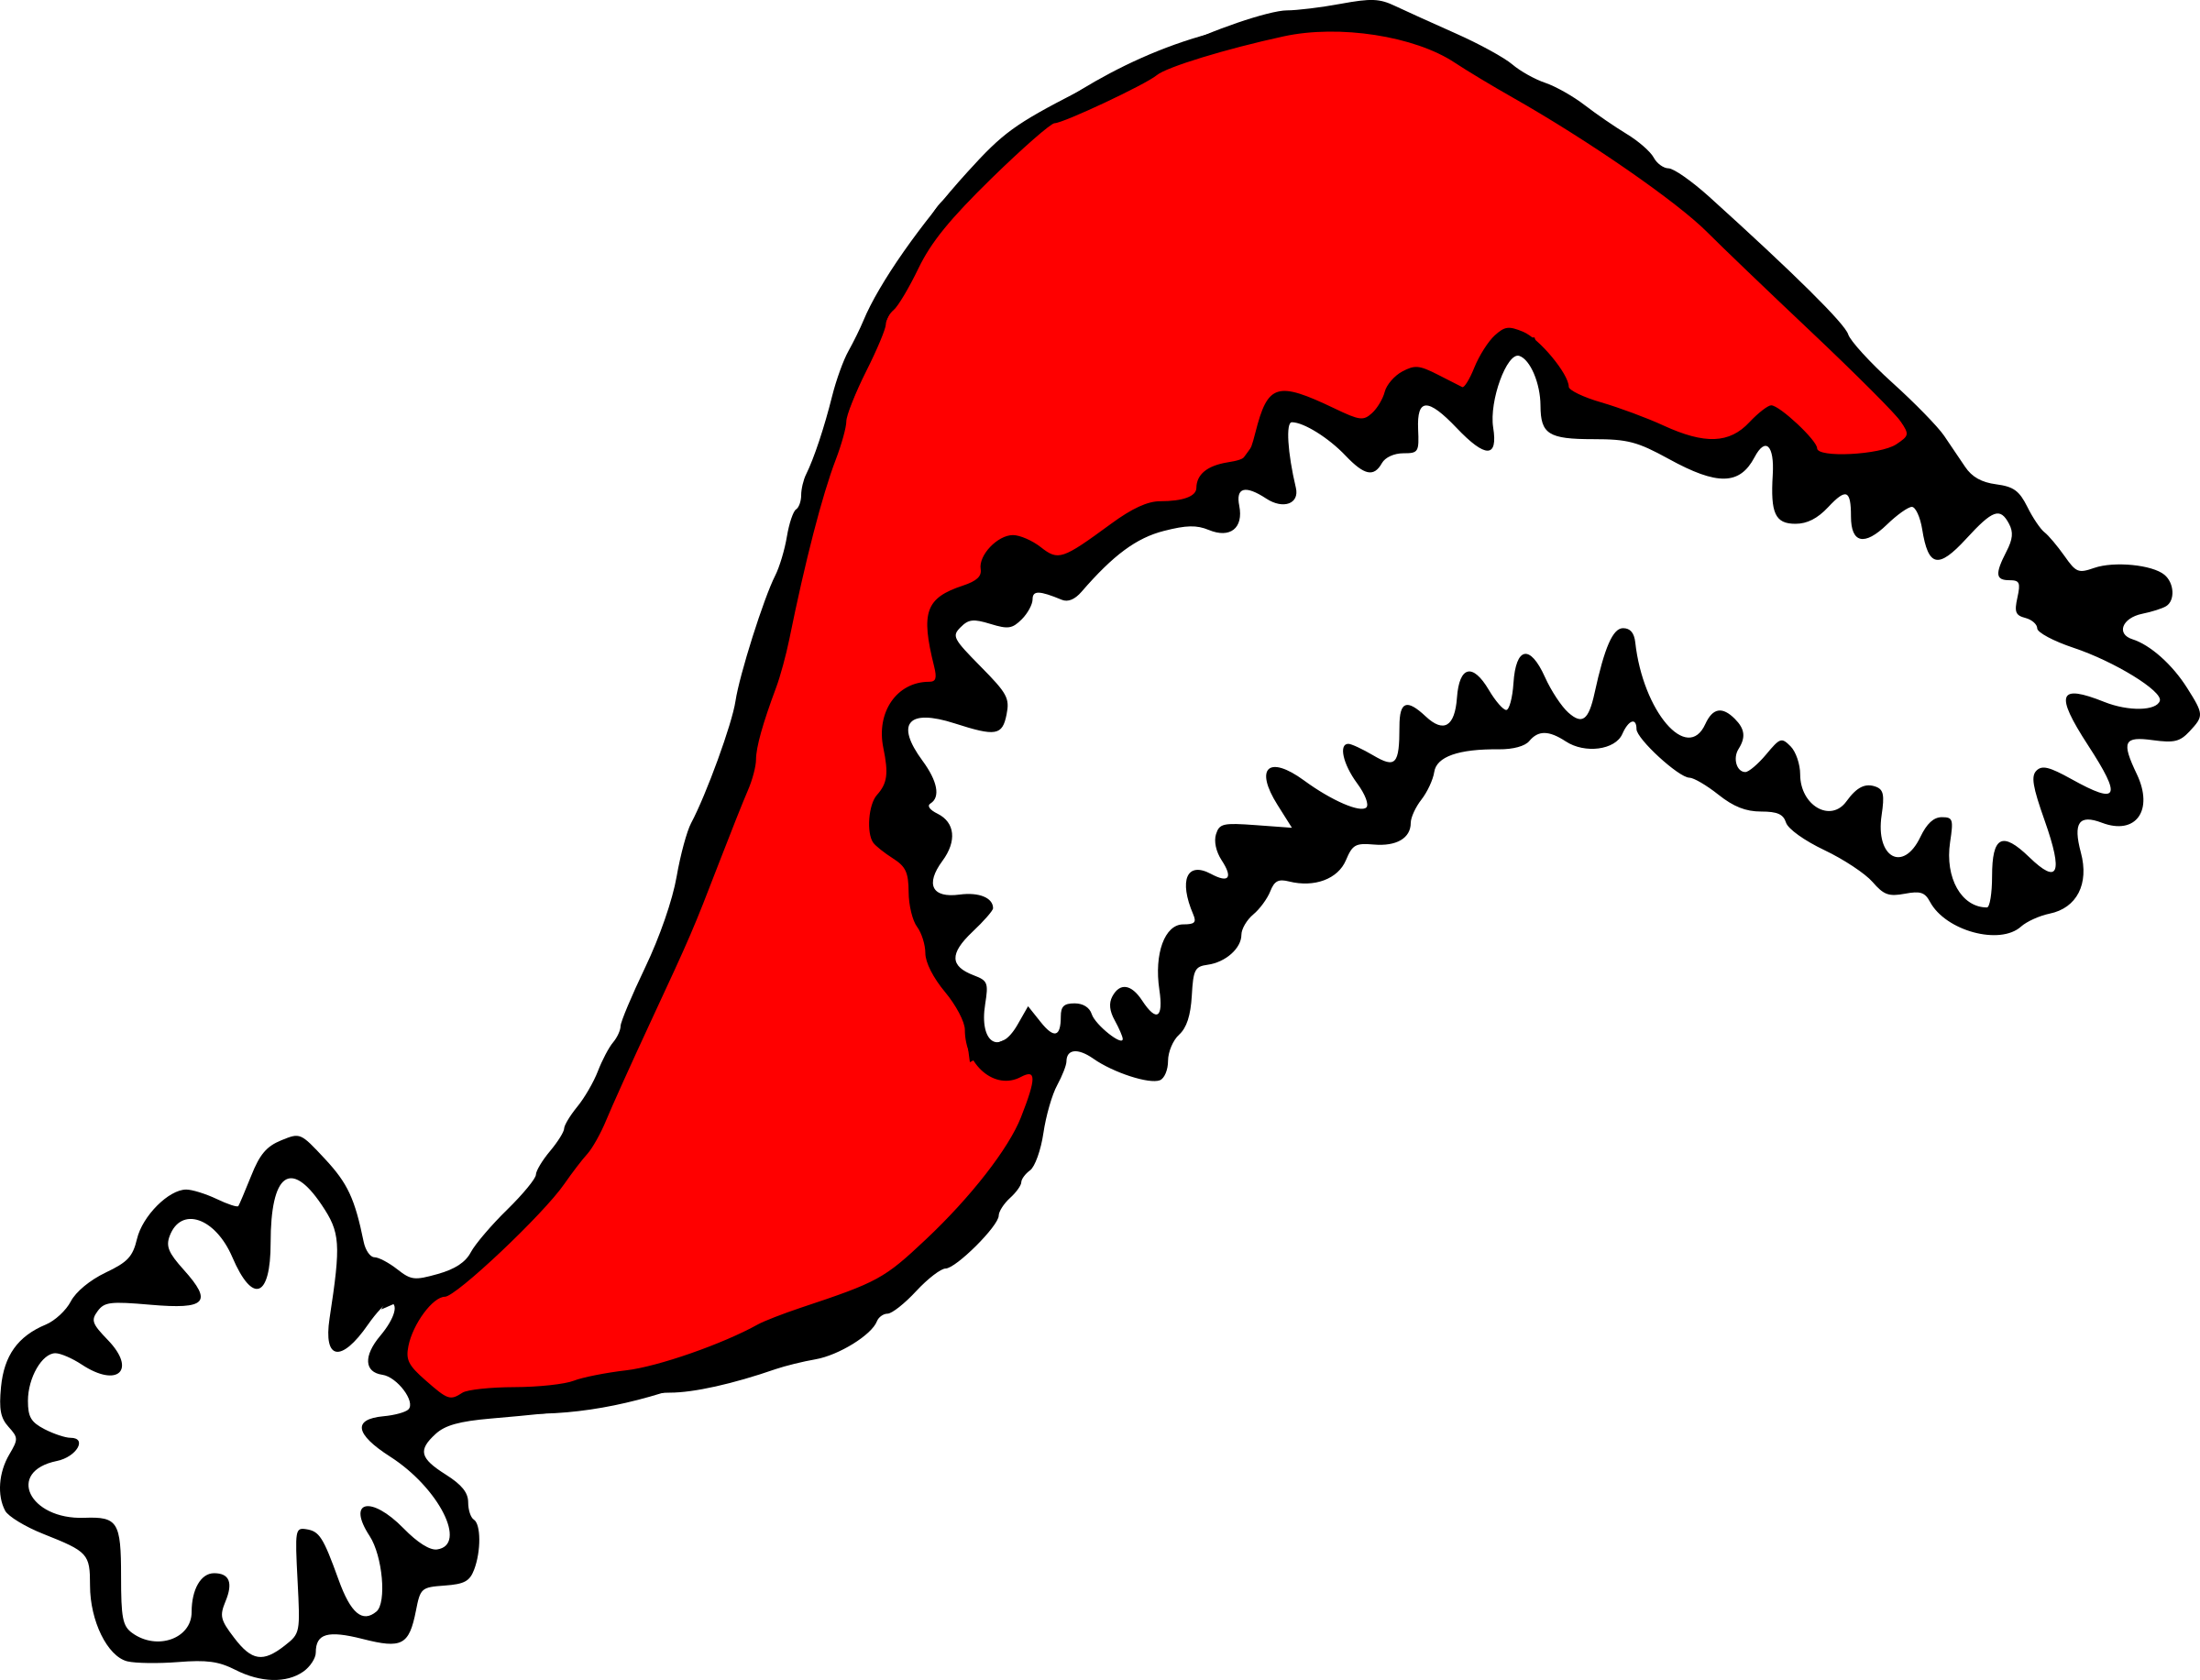 Just A Nice Red Santa Hat For Your Using Pleasure - Christmas Hat Clip Art (2400x1833)